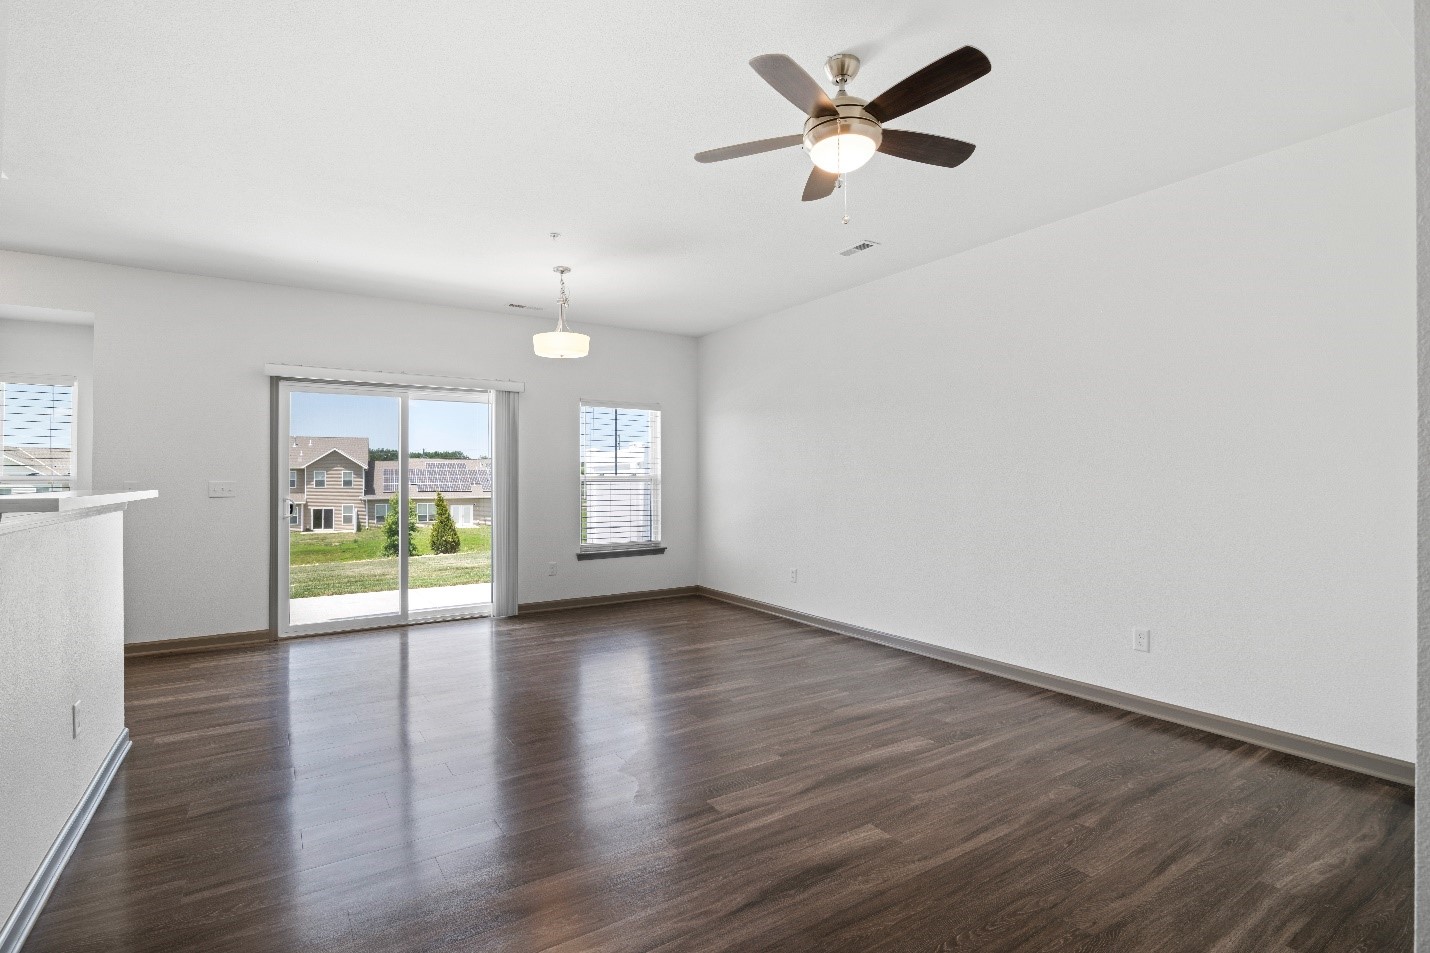 Fort Riley’s newly constructed homes offer an open and airy feel with plenty of natural light.